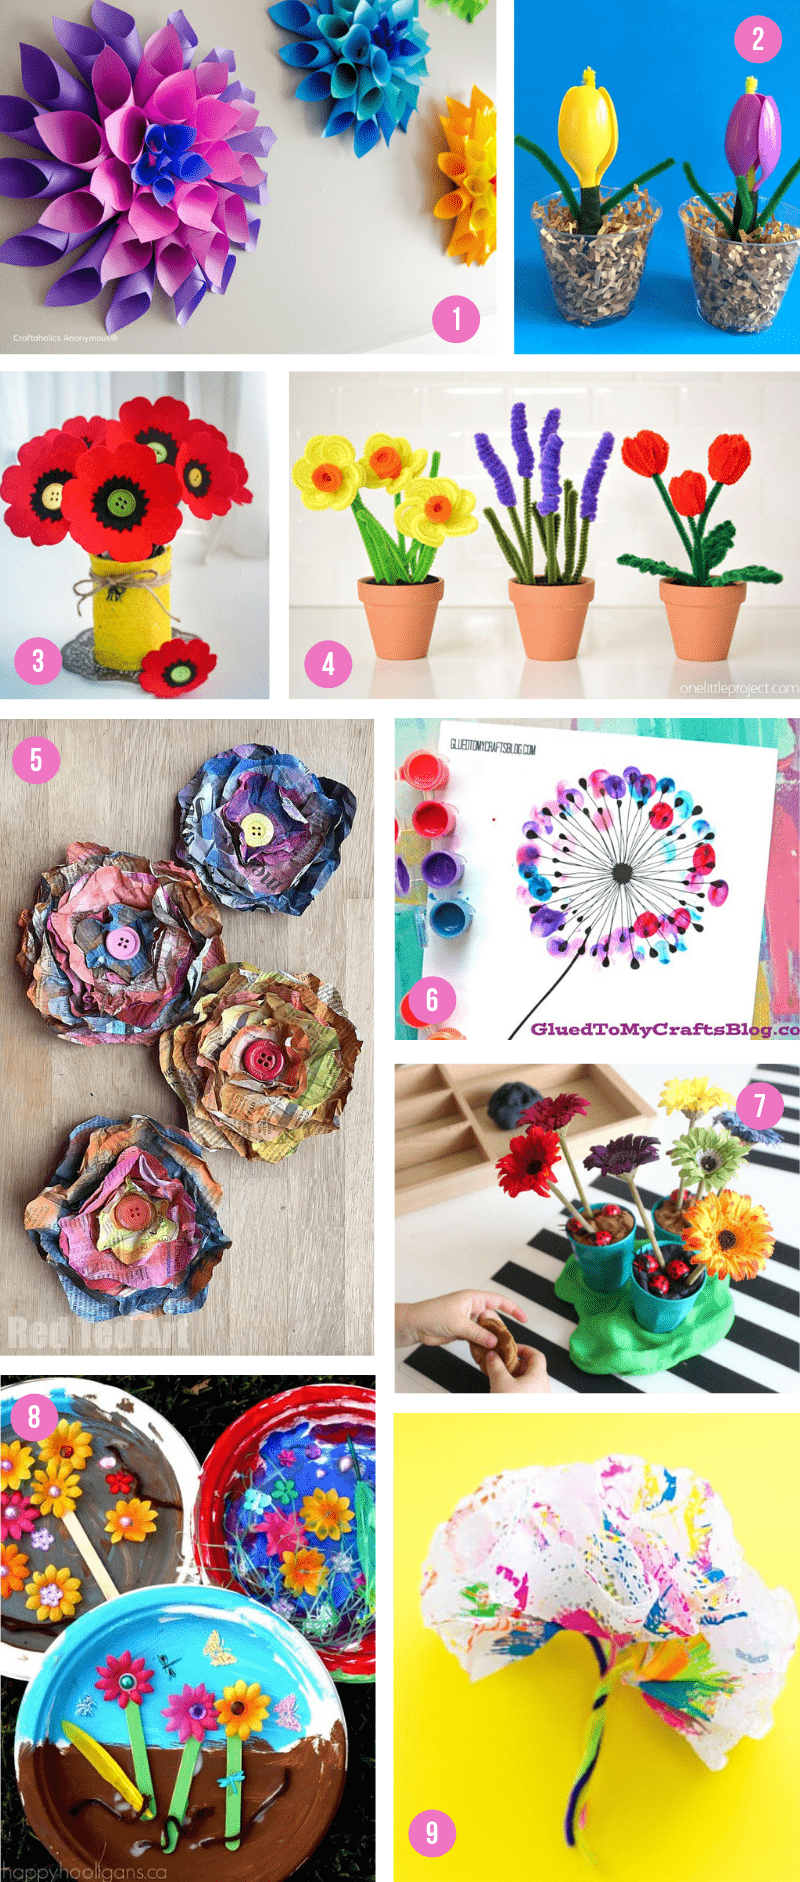 The Epic Collection Of Spring Crafts For Kids All The Best Art Projects Activities To Celebrate The Season What Moms Love,Diy Gifts For Friends During Quarantine